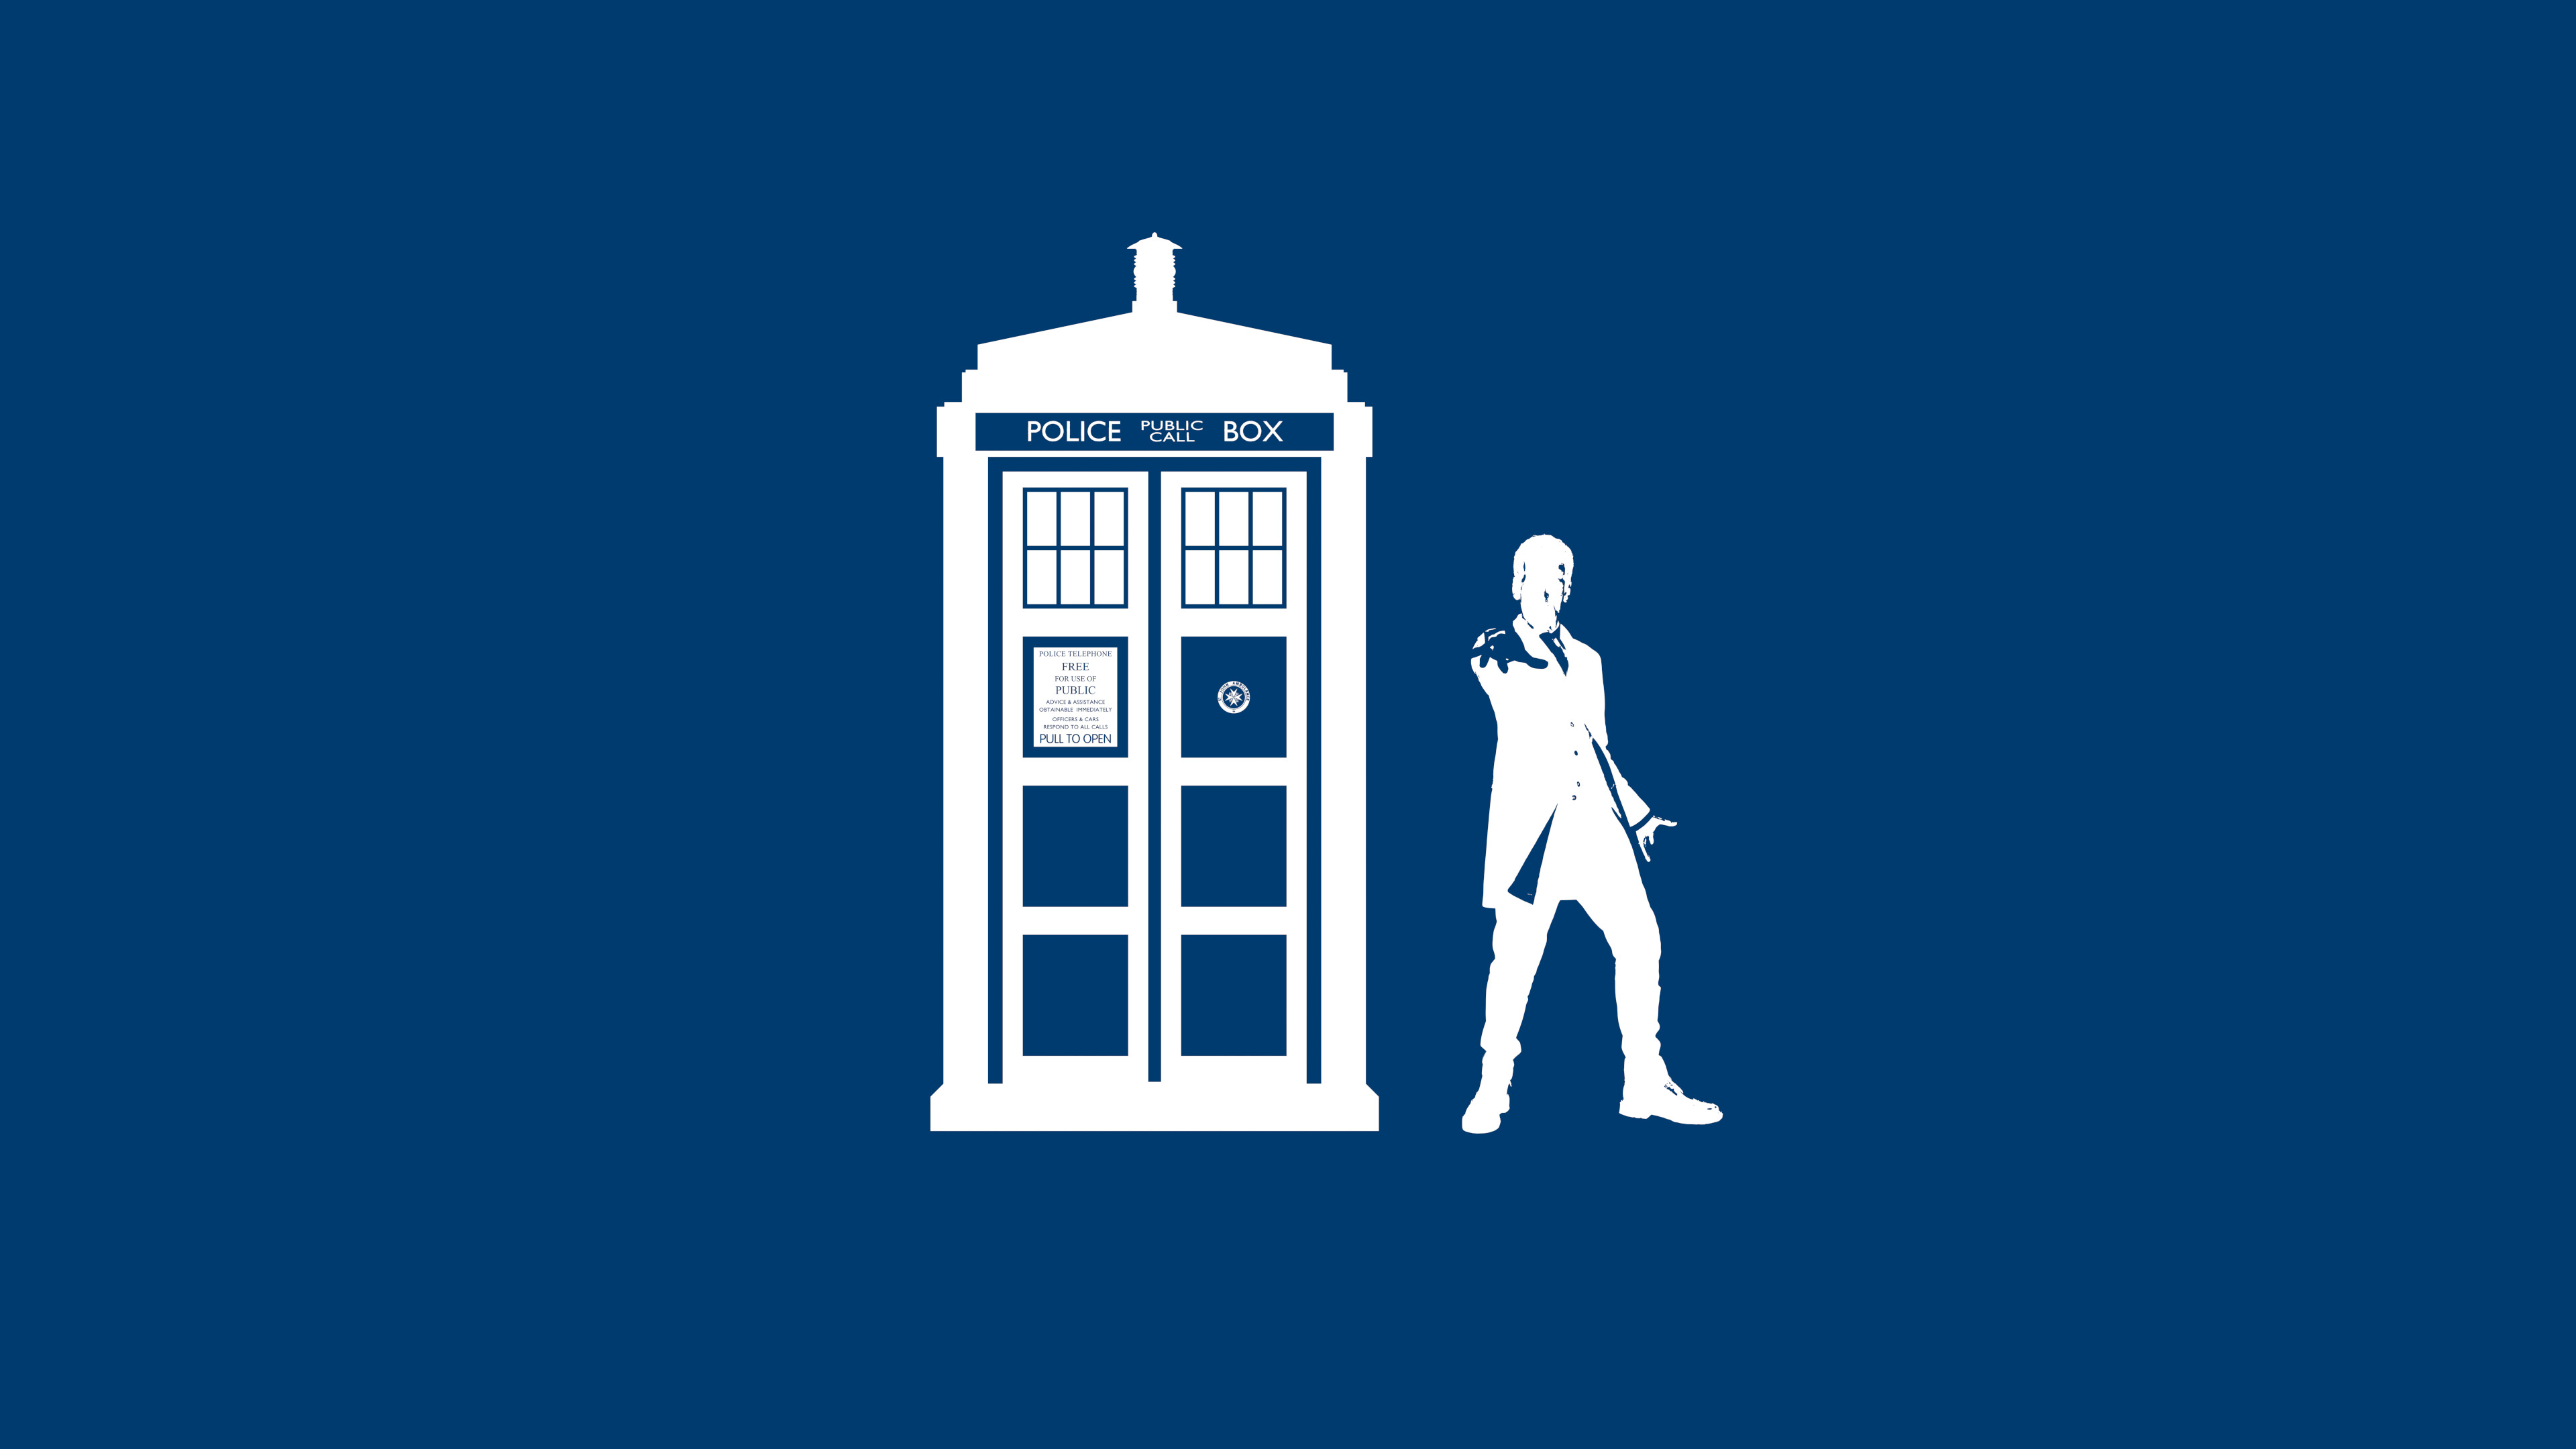 Doctor Who, The Doctor, TARDIS, Peter Capaldi, Simple Background Wallpaper